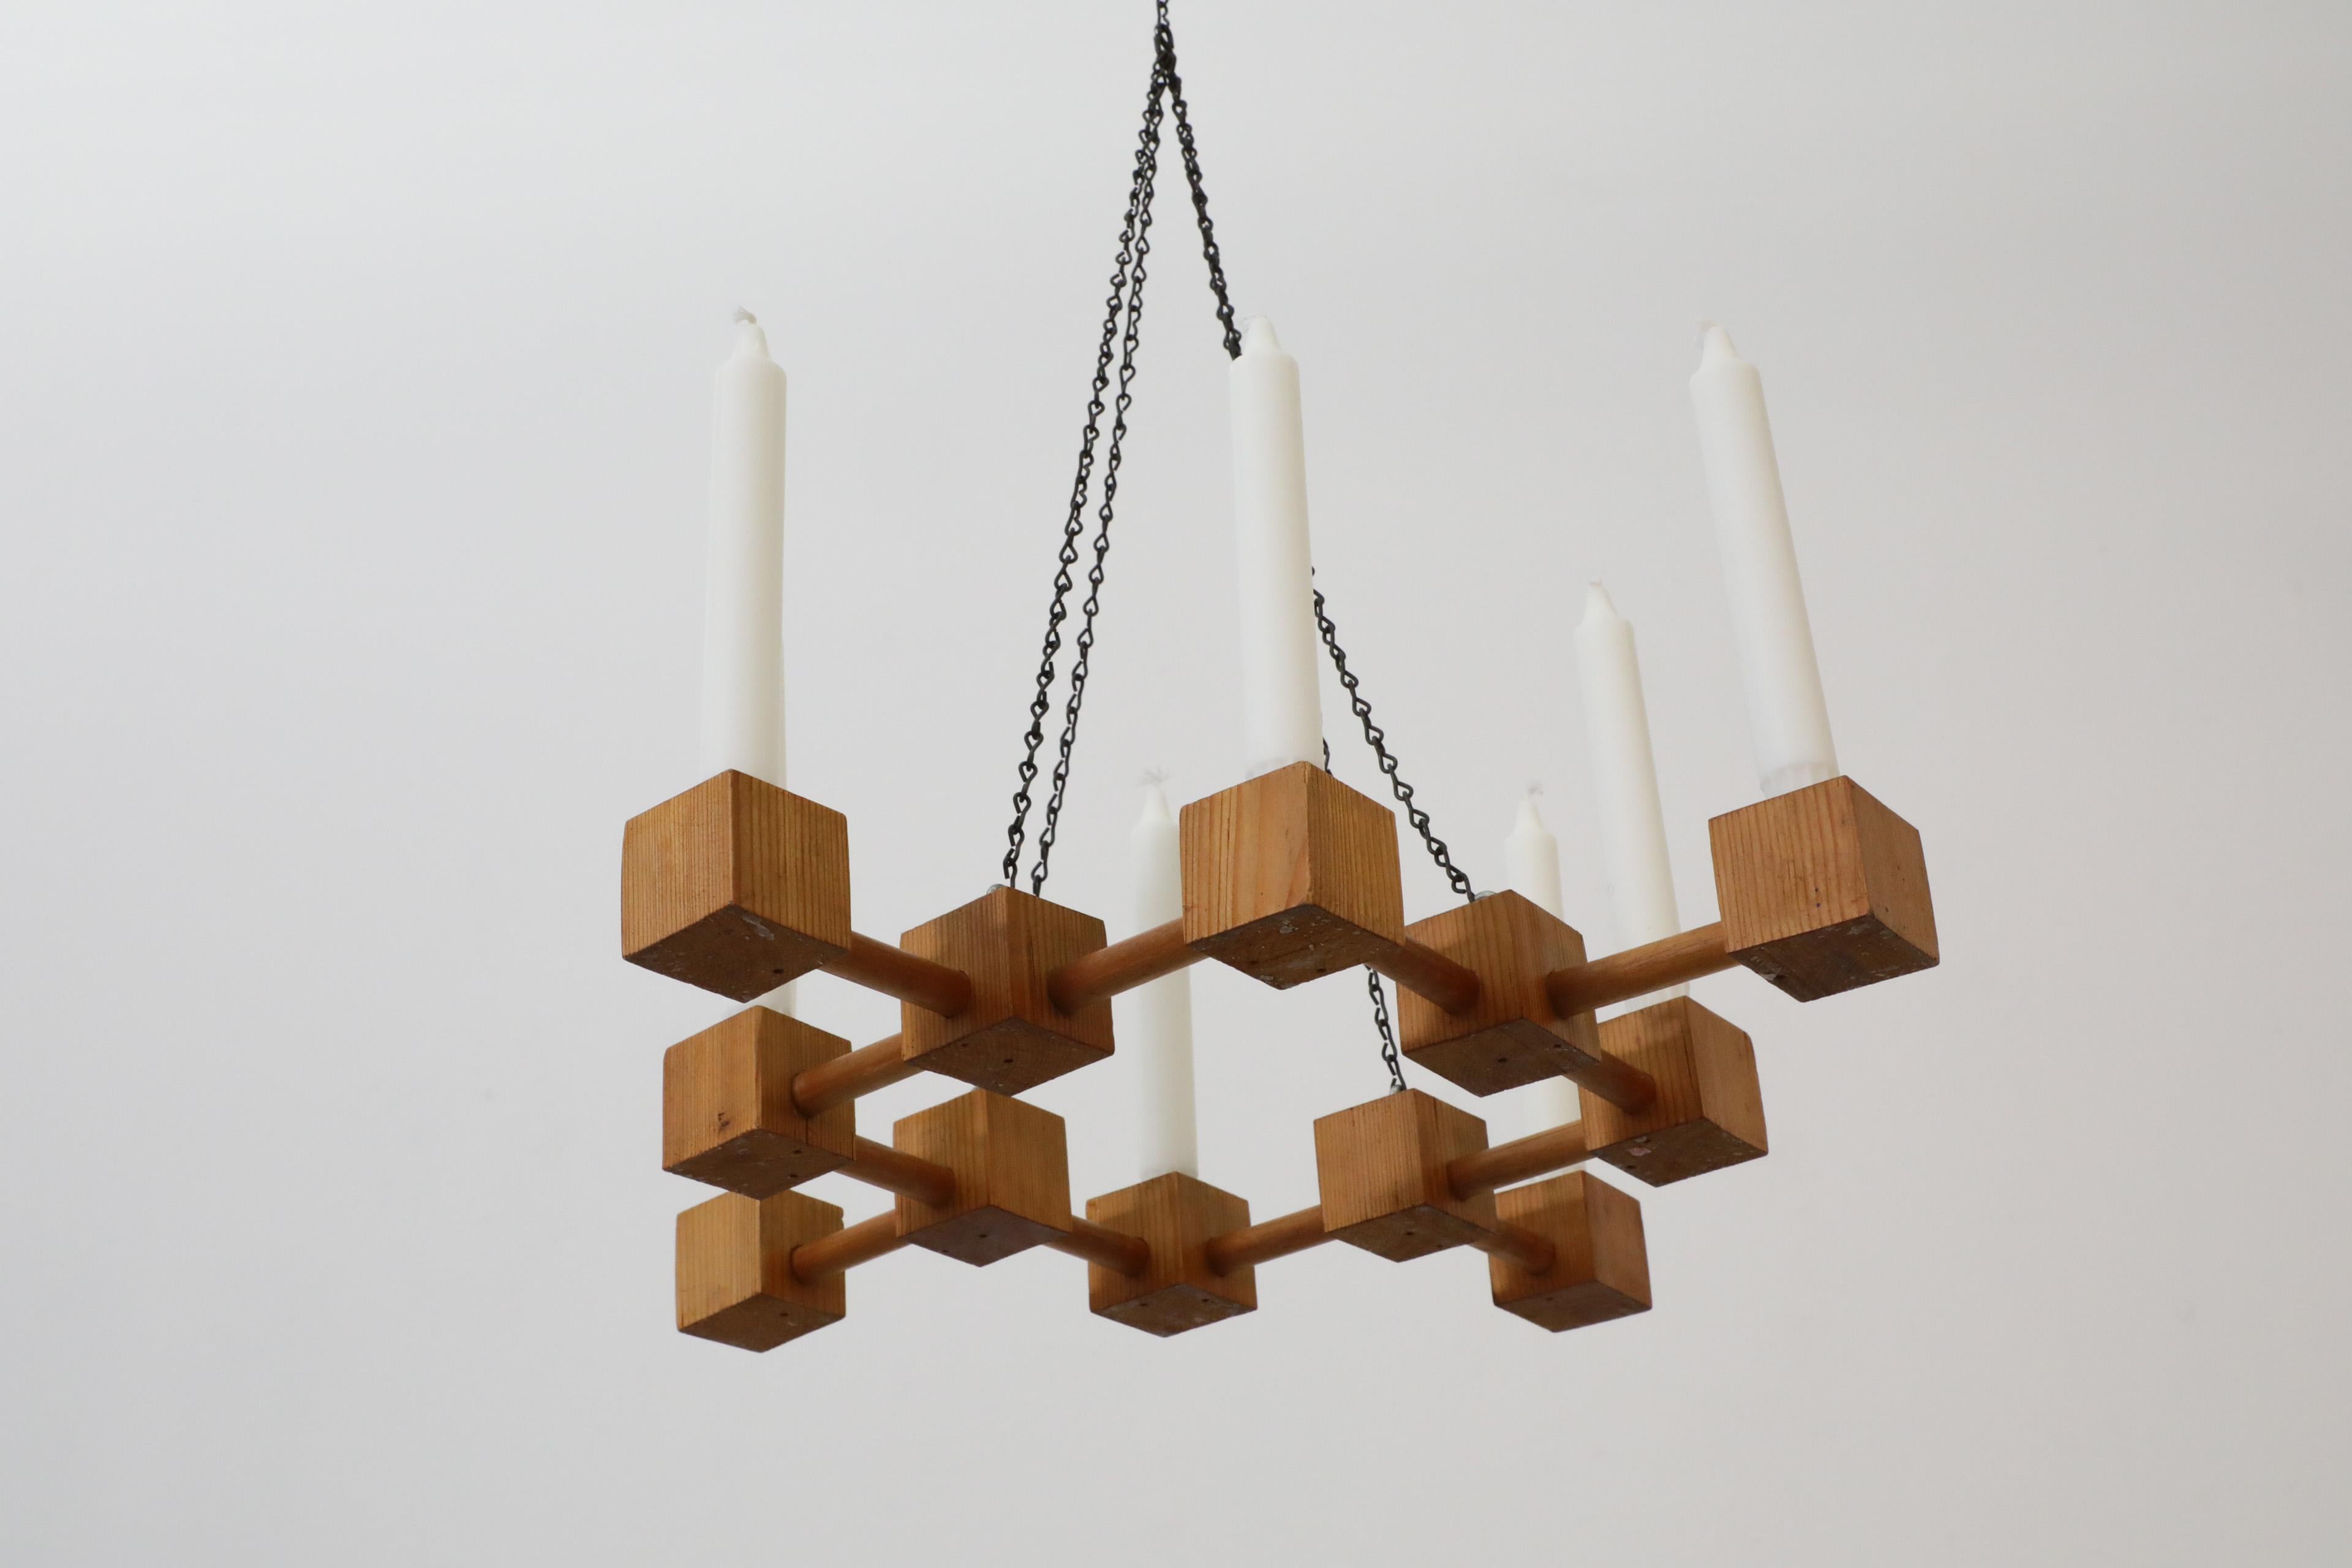 Sculptural Ate van Apeldoorn style Mid-Century Pine Candelabra with Steel Chain In Good Condition For Sale In Los Angeles, CA